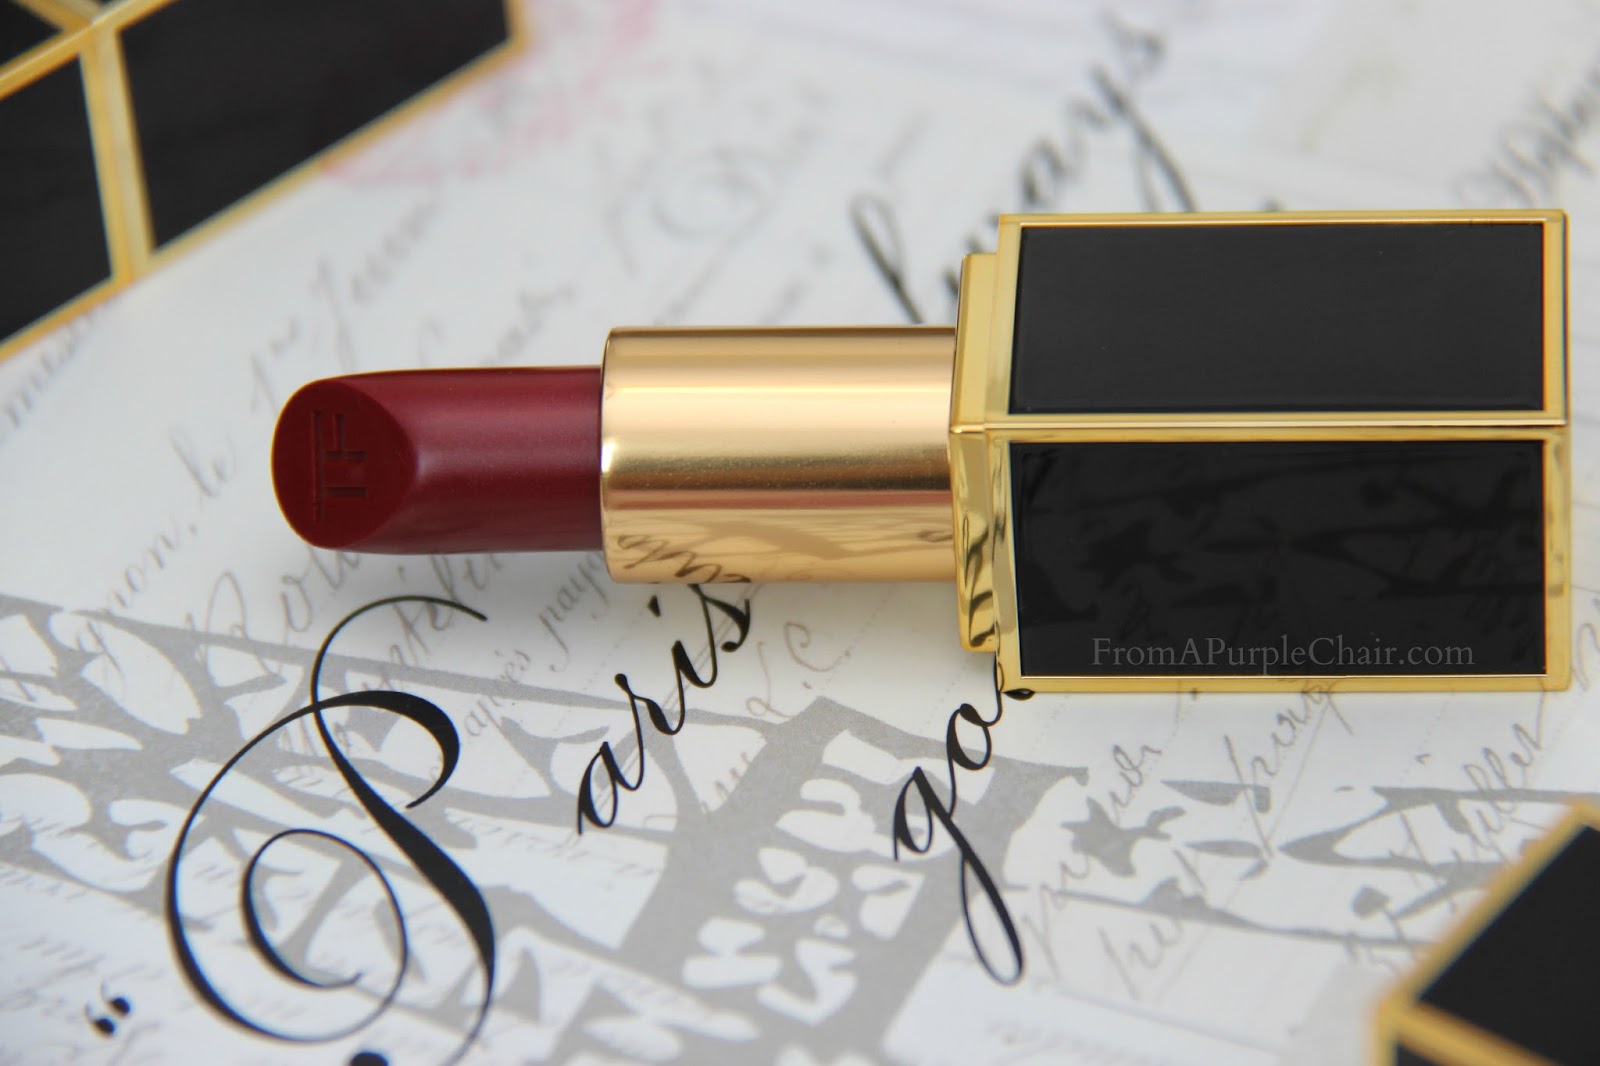 Tom Ford Crimson Noir & Casablanca Review and Swatches - Miss Liz Heart